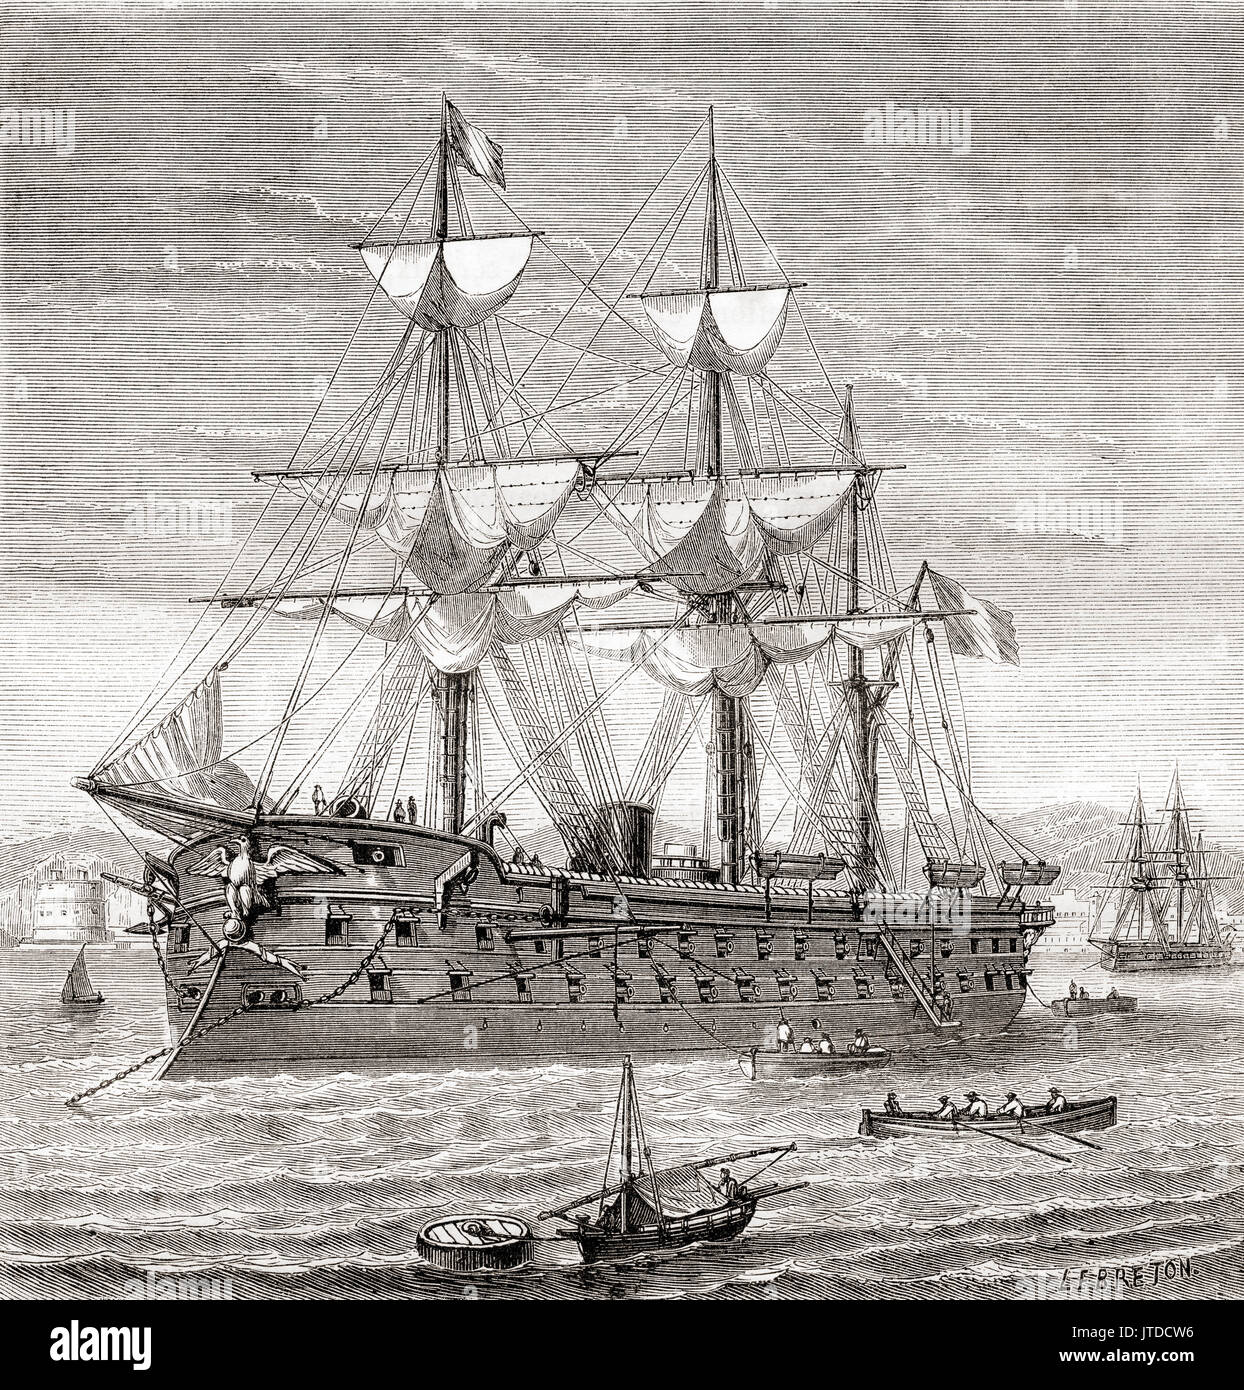 The Solférino, a broadside ironclad warship of the French Navy, launched in 1861.  From Les Merveilles de la Science, published 1870. Stock Photo